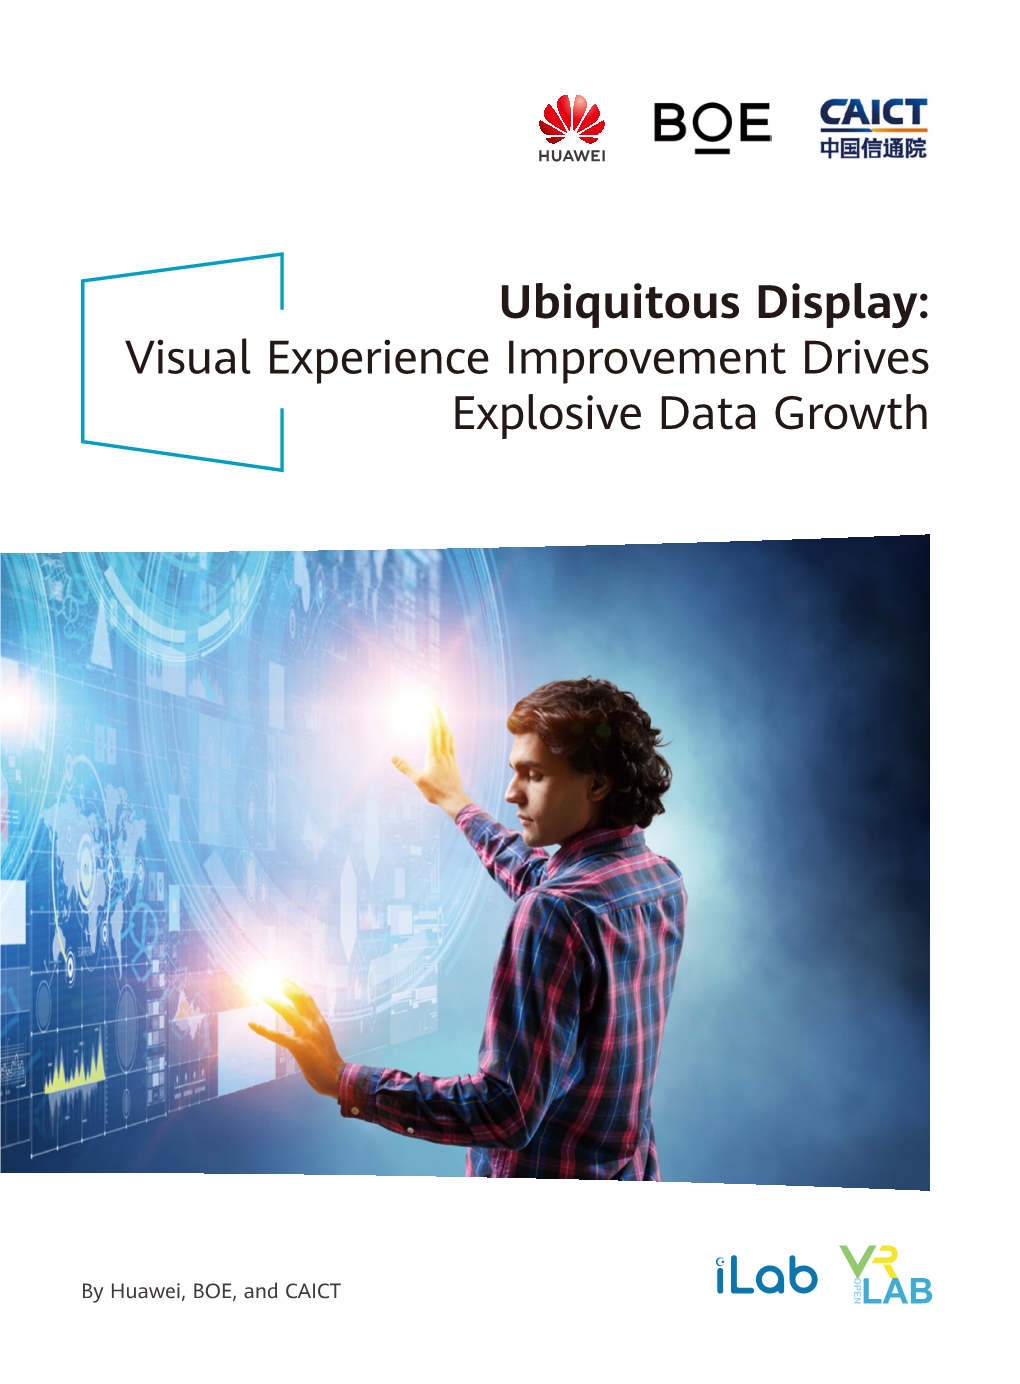 Ubiquitous Display: Visual Experience Improvement Drives Explosive Data Growth